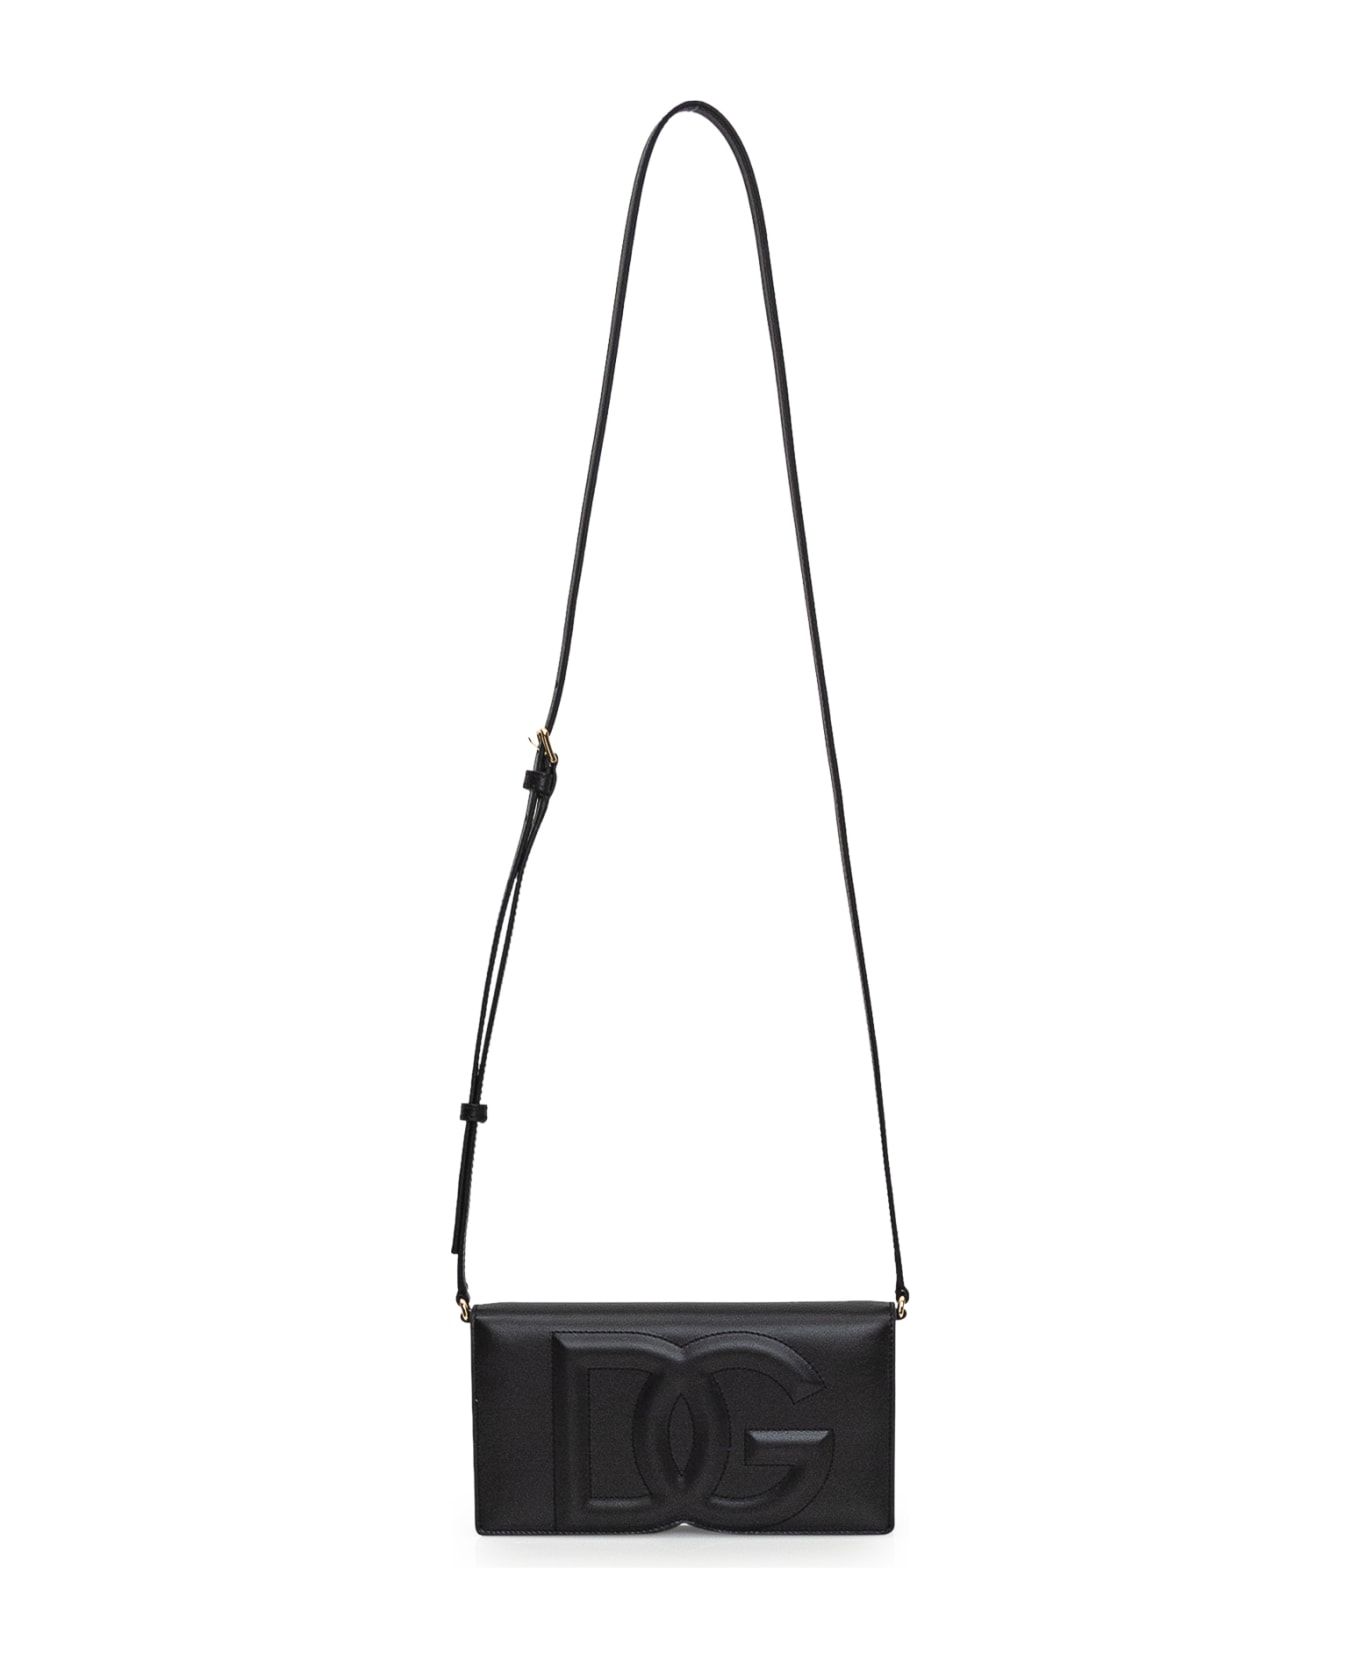 Dolce & Gabbana Leather Phone Bag With Logo - Nero クラッチバッグ